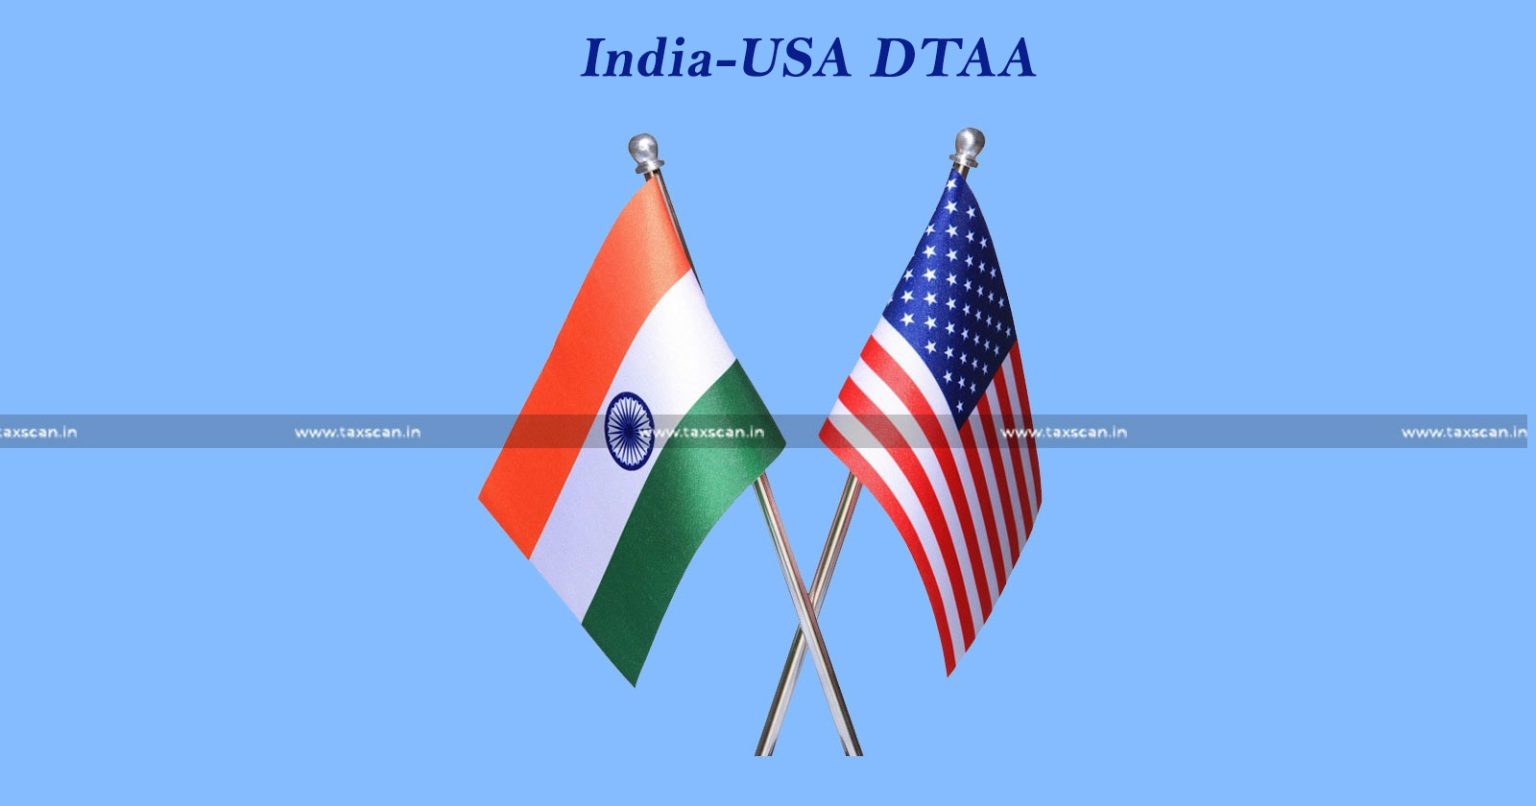 Sale Agents - rendered Services - outside India - Payment - Foreign Exchange - Taxable - India-USA DTAA - ITAT - Disallowance - taxscan